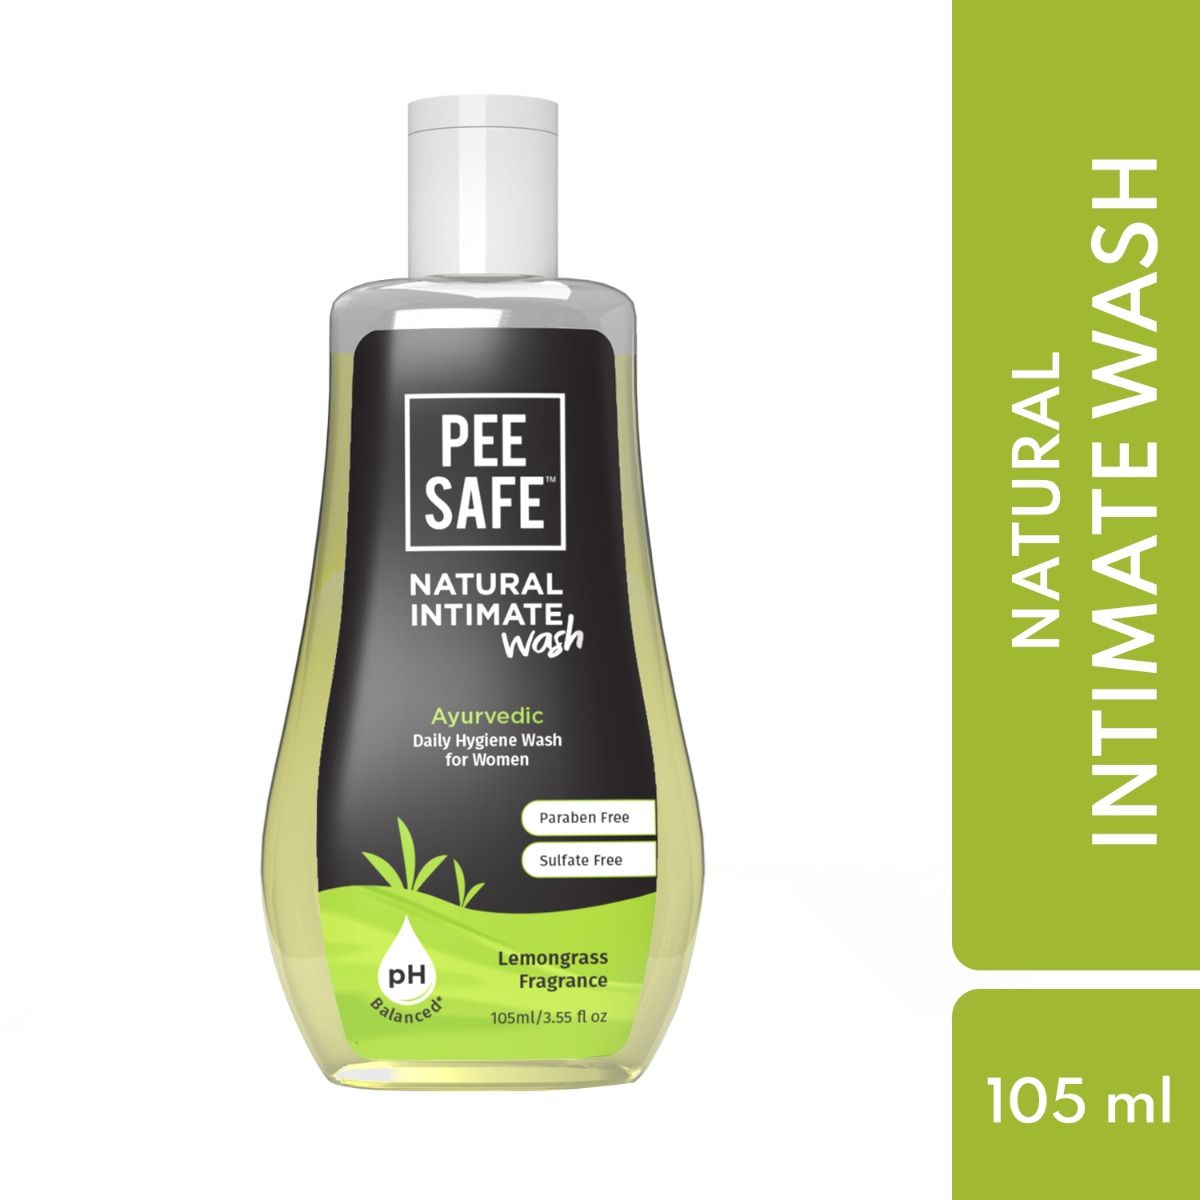 Buy Pee Safe Natural Intimate Wash, 105 ml Online